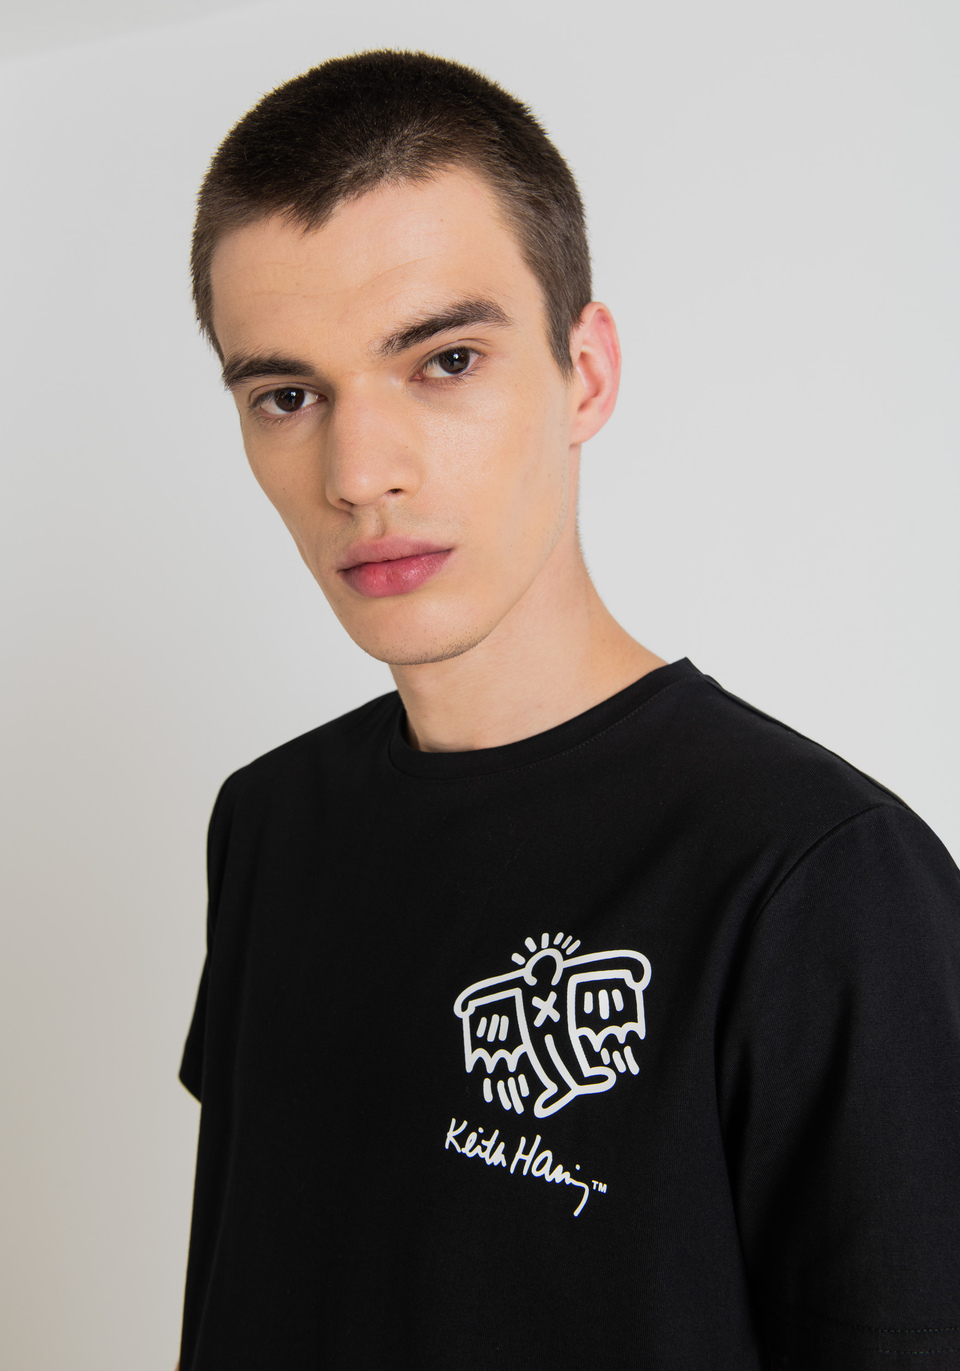 SLIM FIT T-SHIRT IN PURE COTTON WITH KEITH HARING PRINT - Antony Morato Online Shop